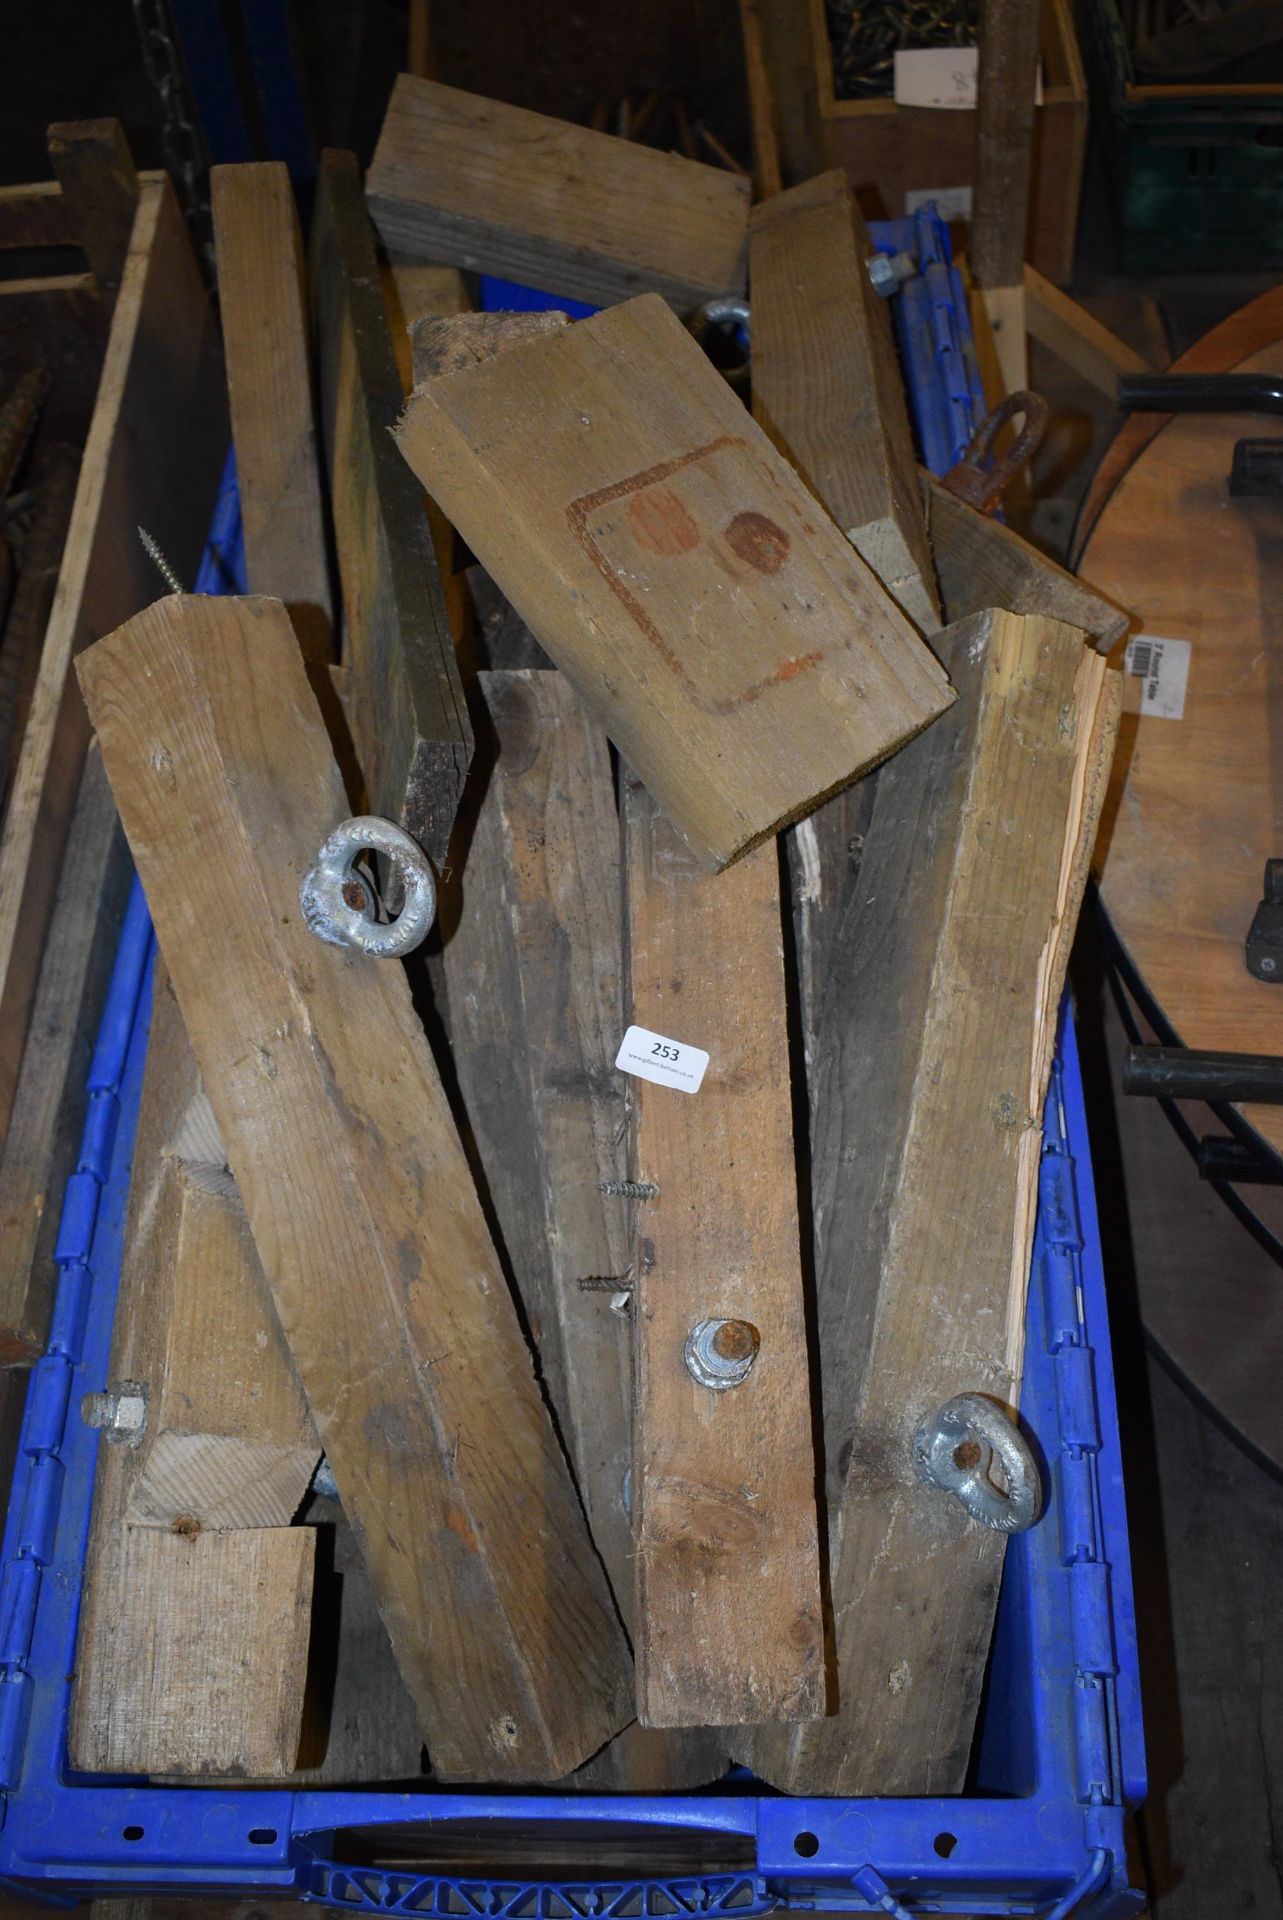 *Wooden Crate Containing Wooden Battens with Lifting Eyes